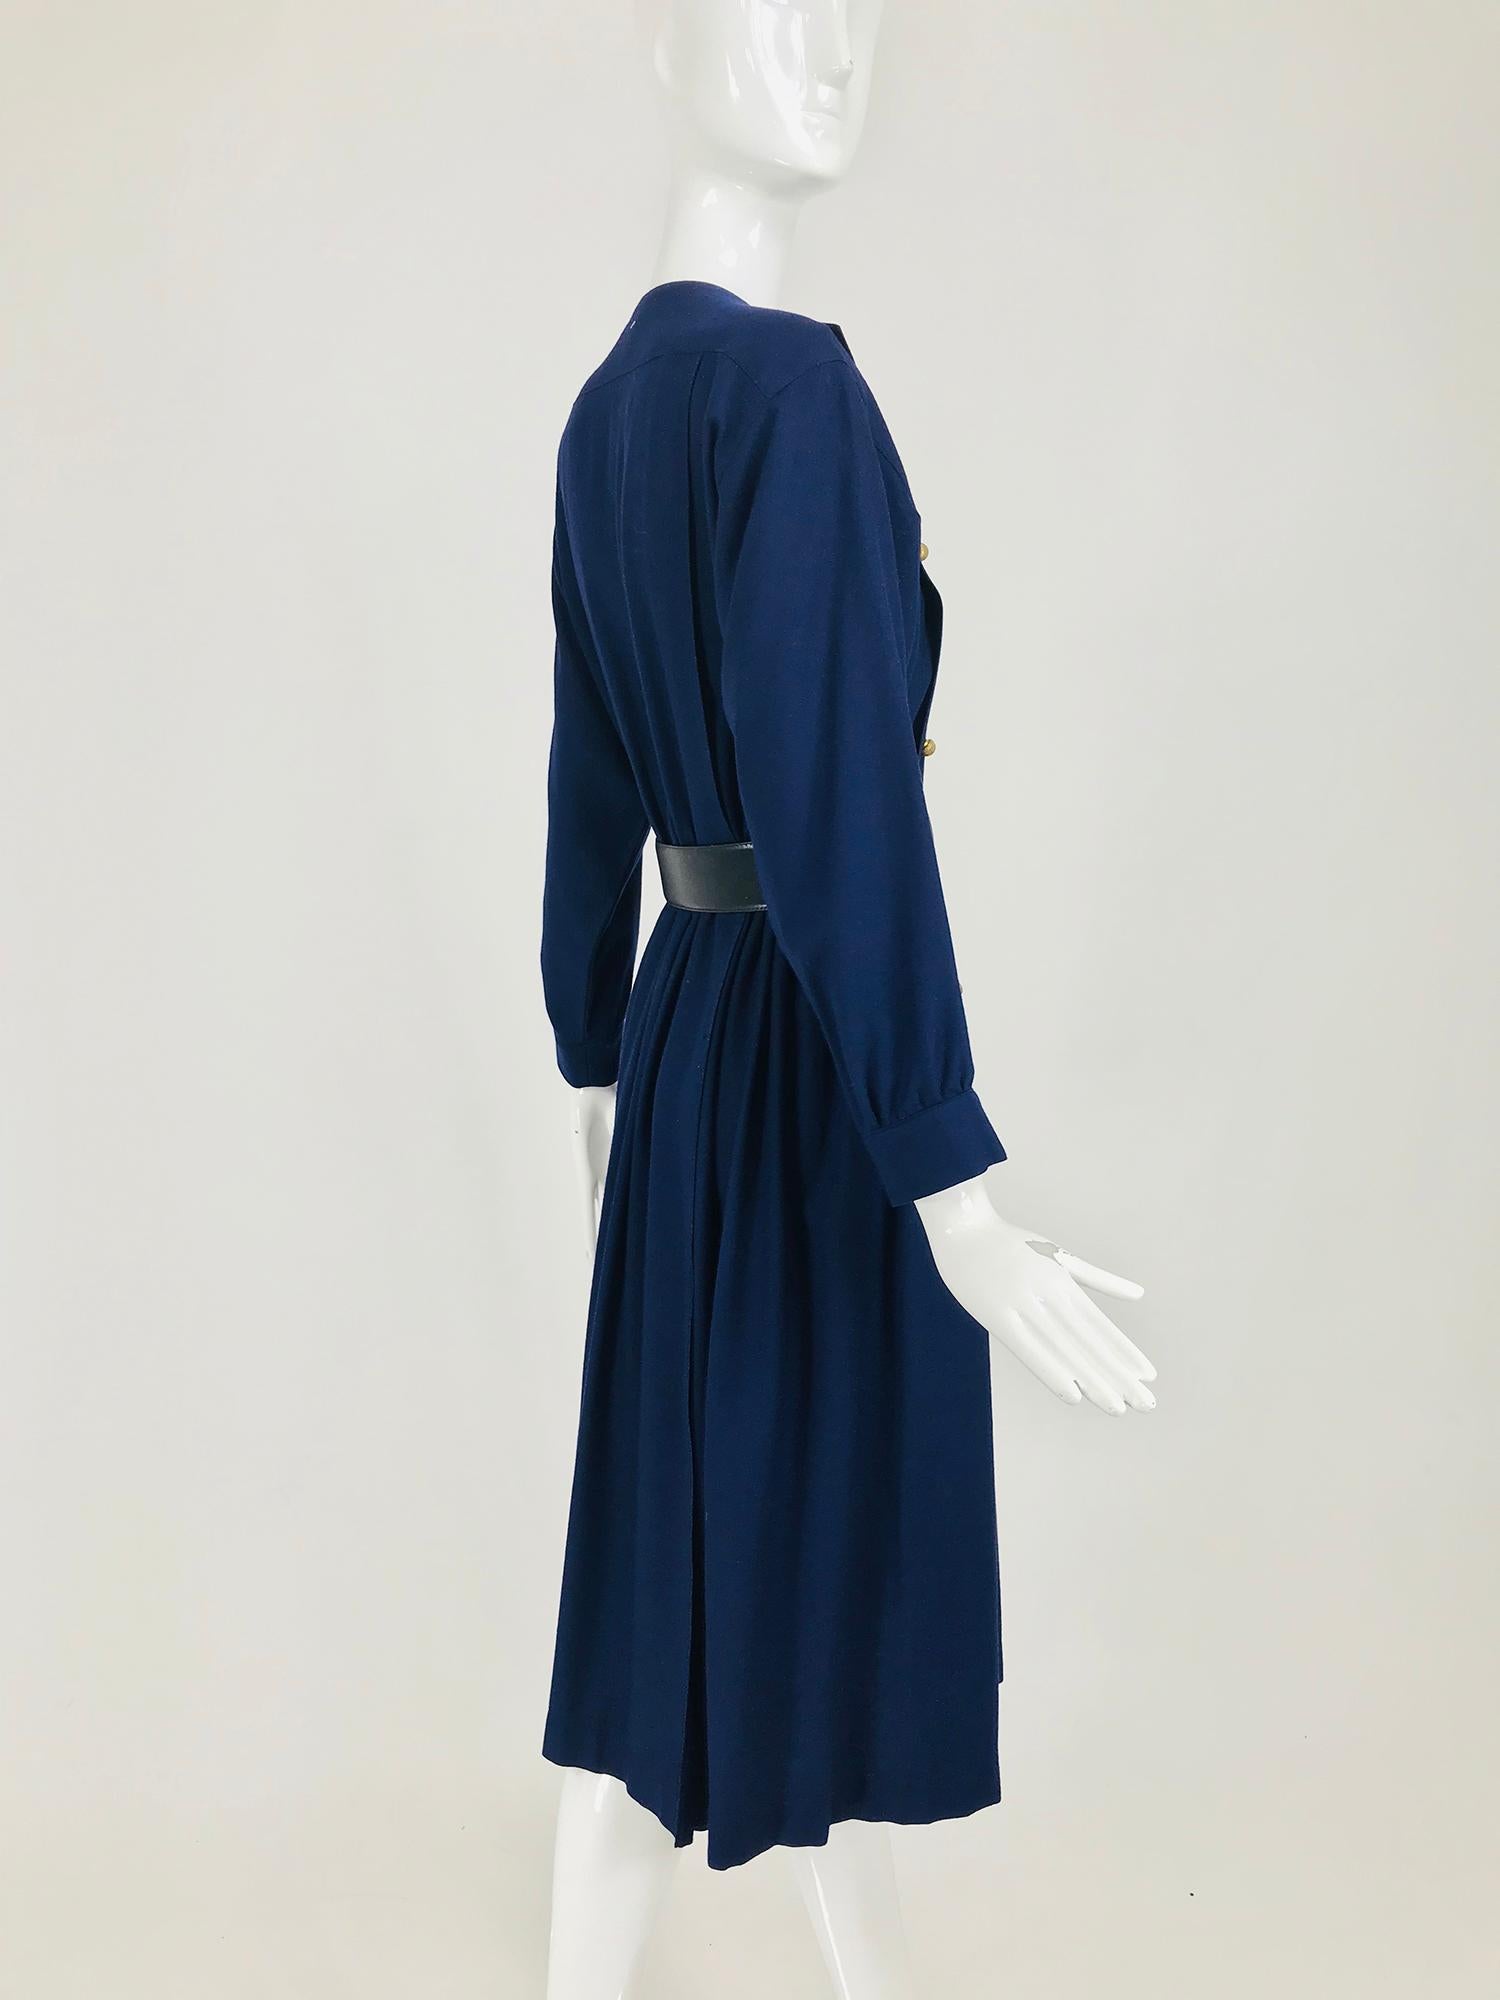 Chloe 1981 Karl Lagerfeld Blue Embroidered Button Front Dress Documented 9